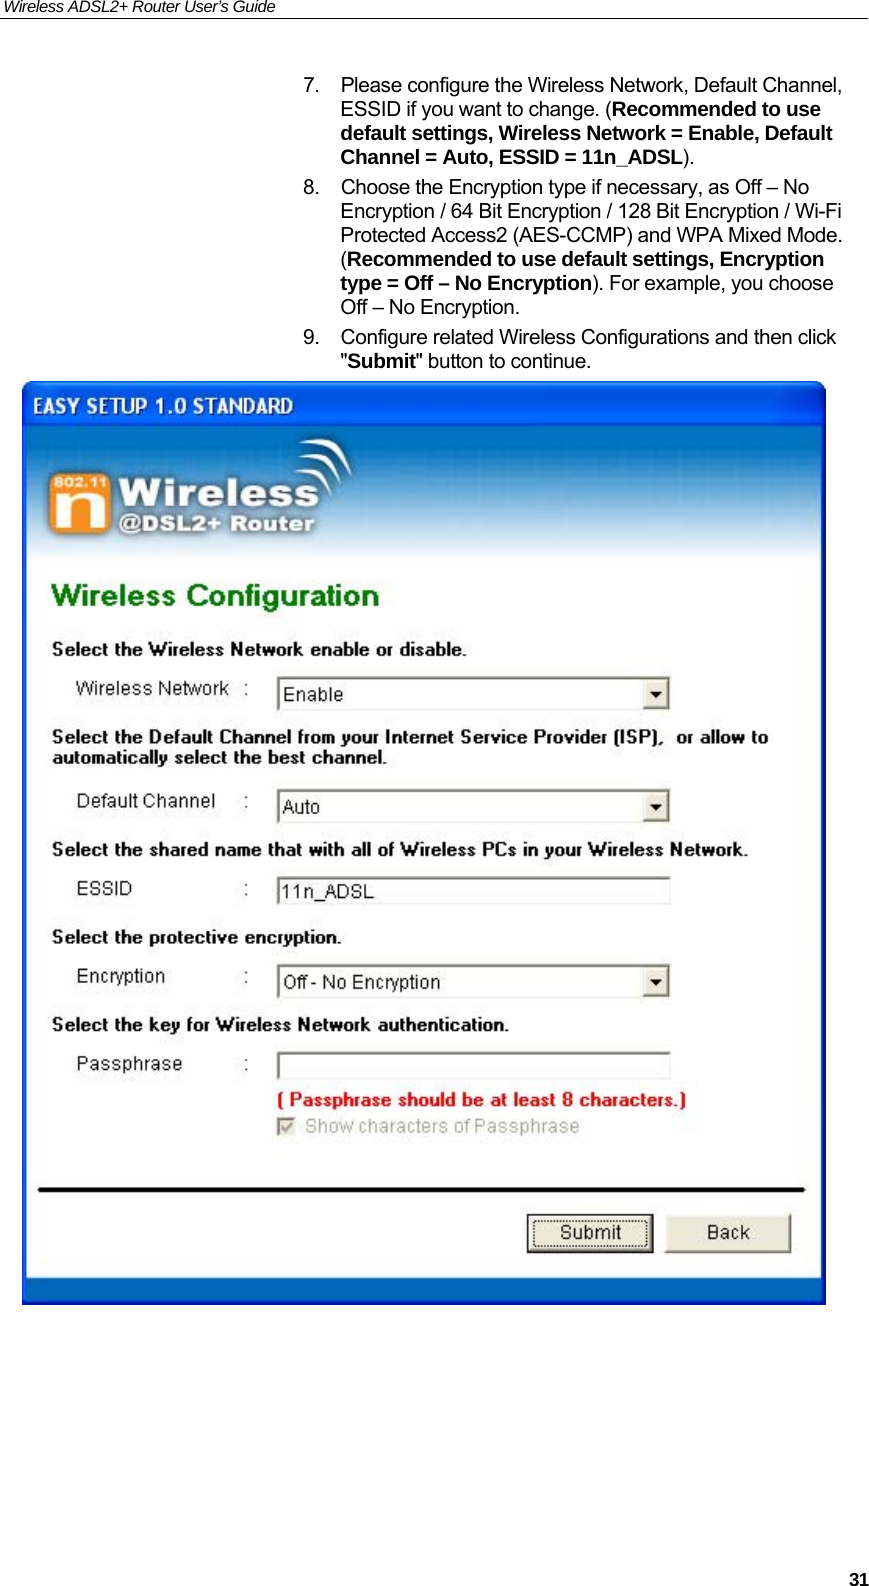 Wireless ADSL2+ Router User’s Guide     317.  Please configure the Wireless Network, Default Channel, ESSID if you want to change. (Recommended to use default settings, Wireless Network = Enable, Default Channel = Auto, ESSID = 11n_ADSL). 8.  Choose the Encryption type if necessary, as Off – No Encryption / 64 Bit Encryption / 128 Bit Encryption / Wi-Fi Protected Access2 (AES-CCMP) and WPA Mixed Mode. (Recommended to use default settings, Encryption type = Off – No Encryption). For example, you choose Off – No Encryption. 9.  Configure related Wireless Configurations and then click &quot;Submit&quot; button to continue.       